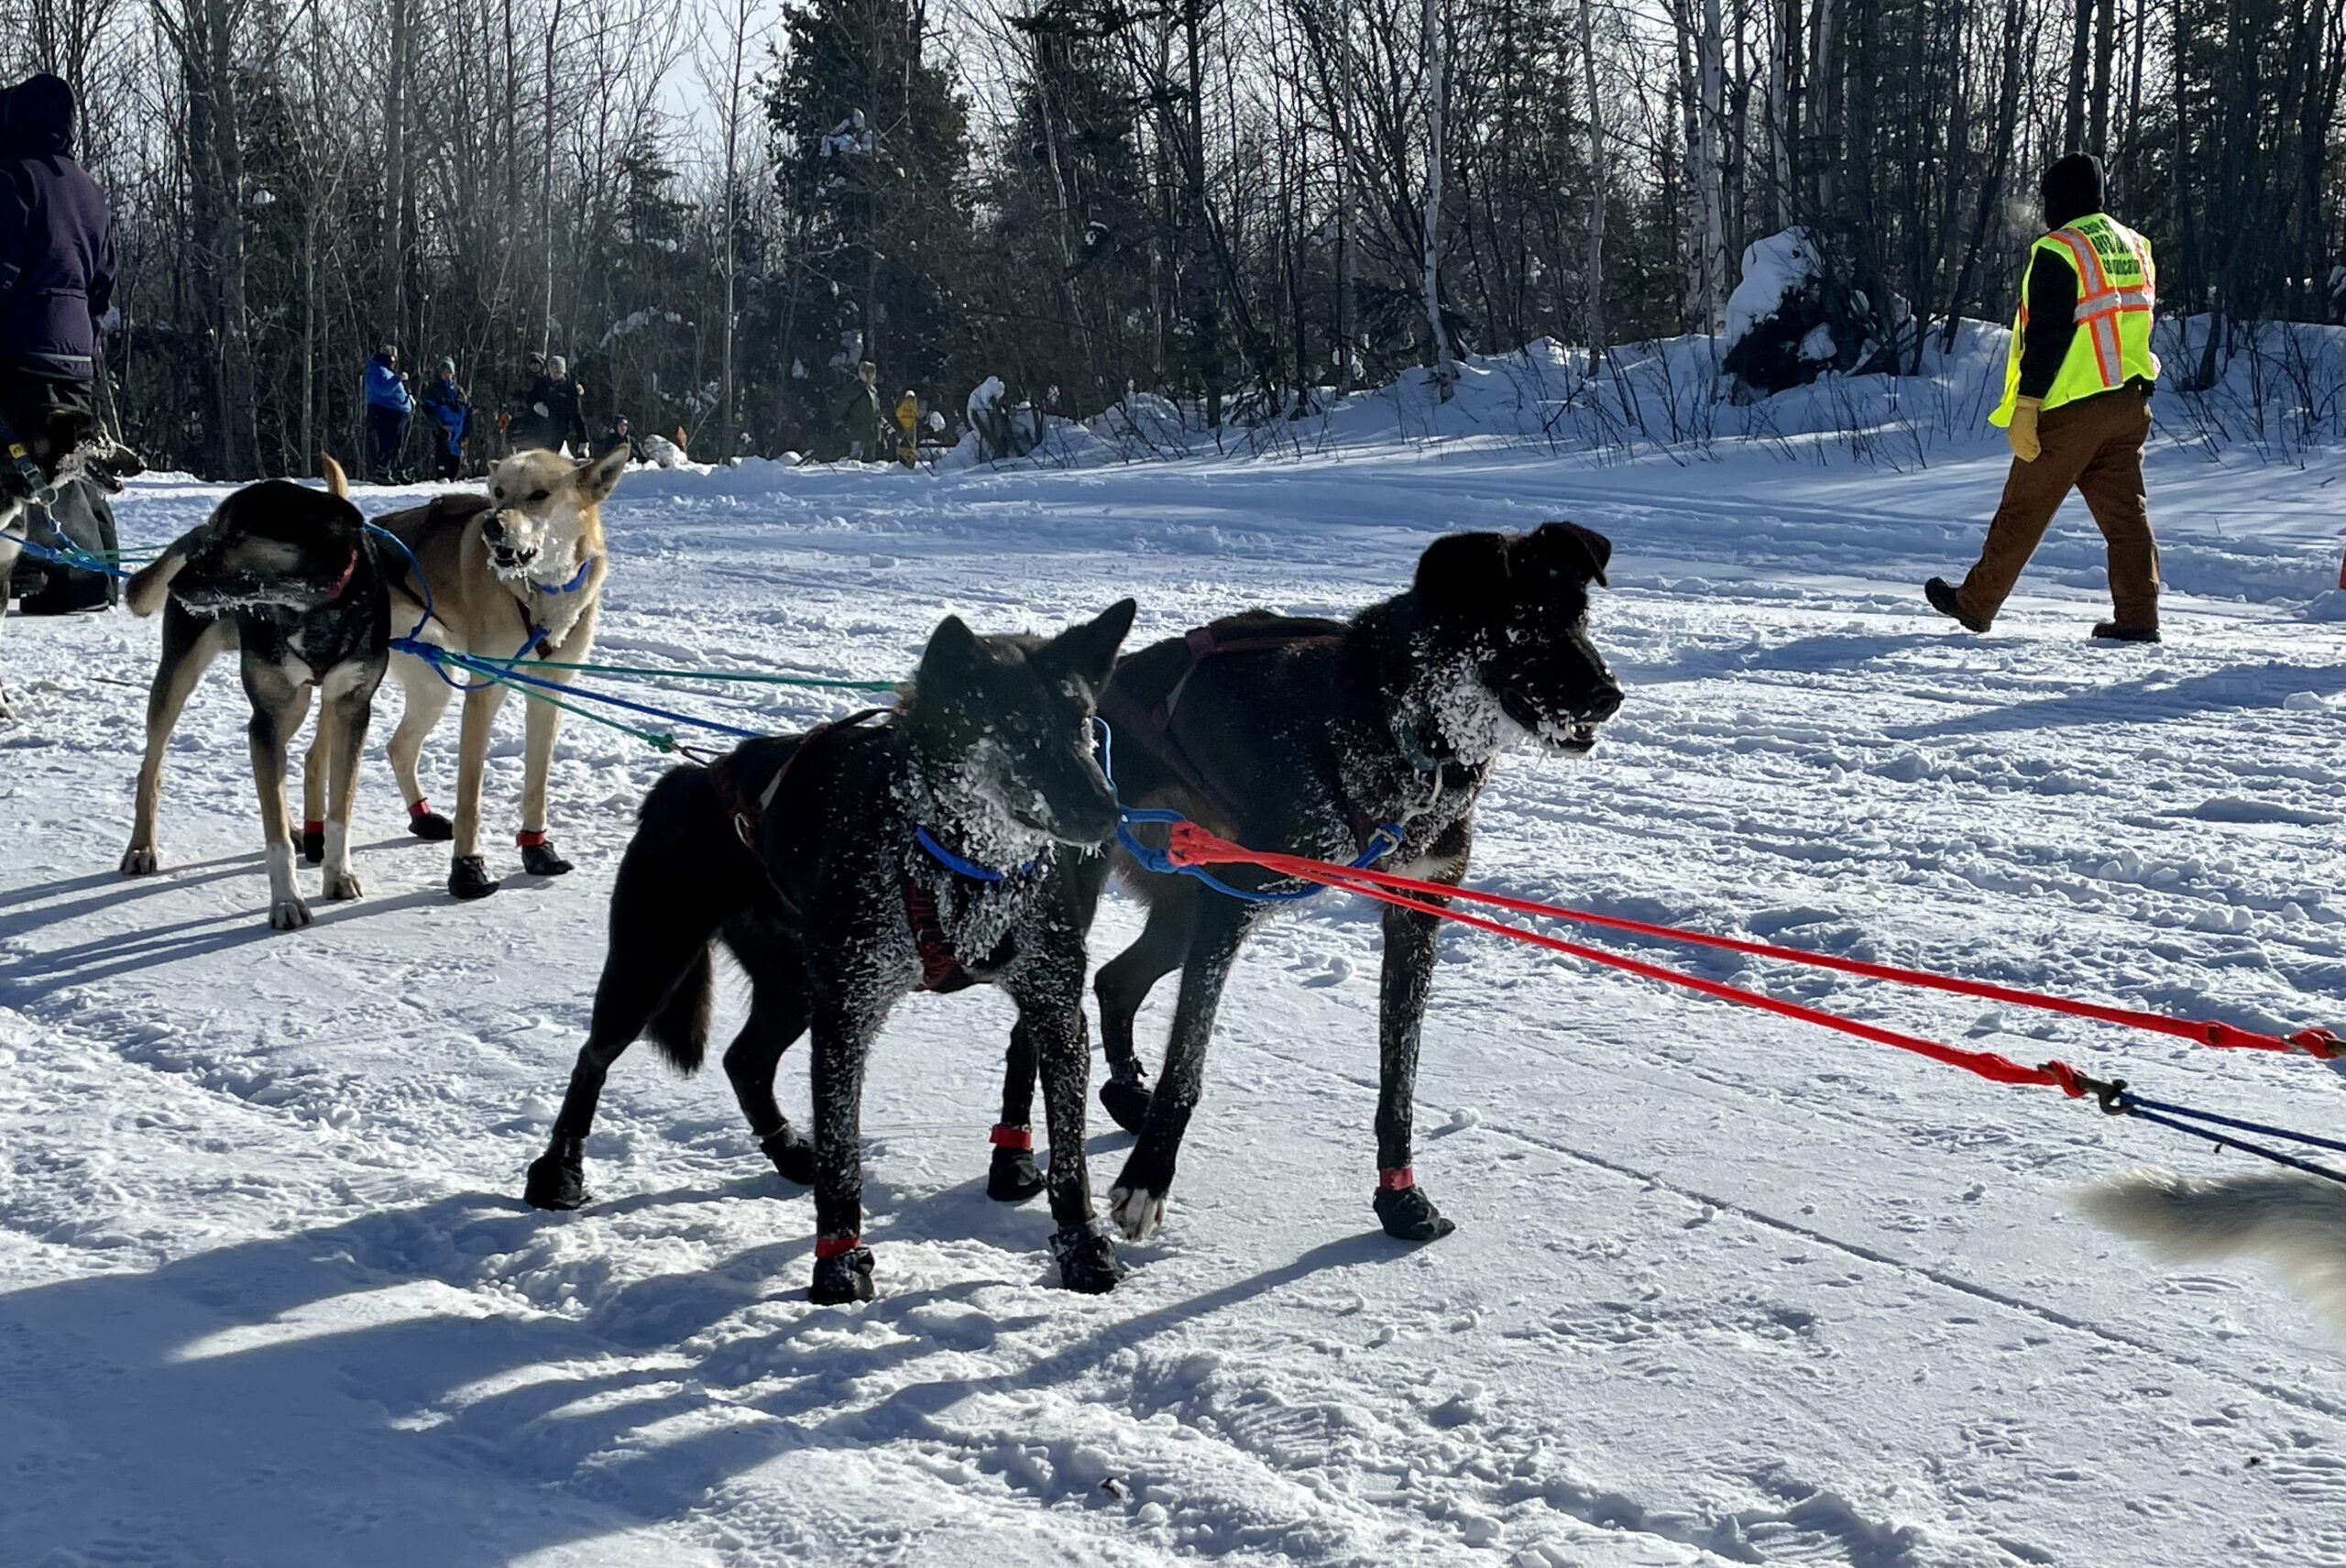 Four sled dogs in harness ready to go.